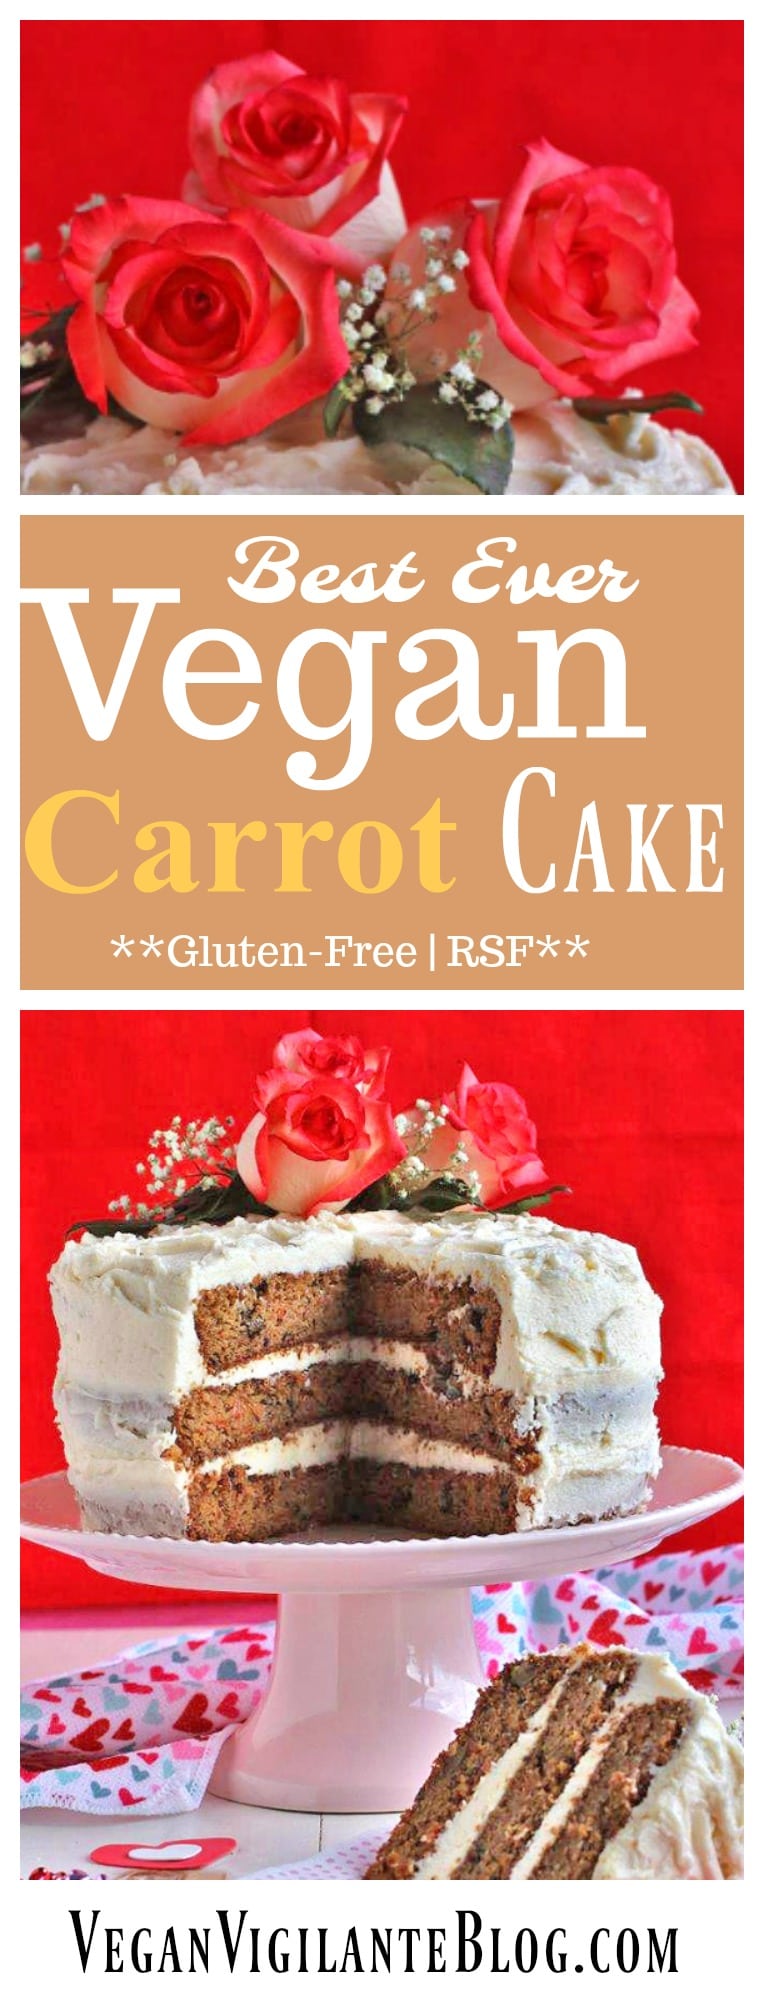 A Pinterest pin of cake carrot cream cheese